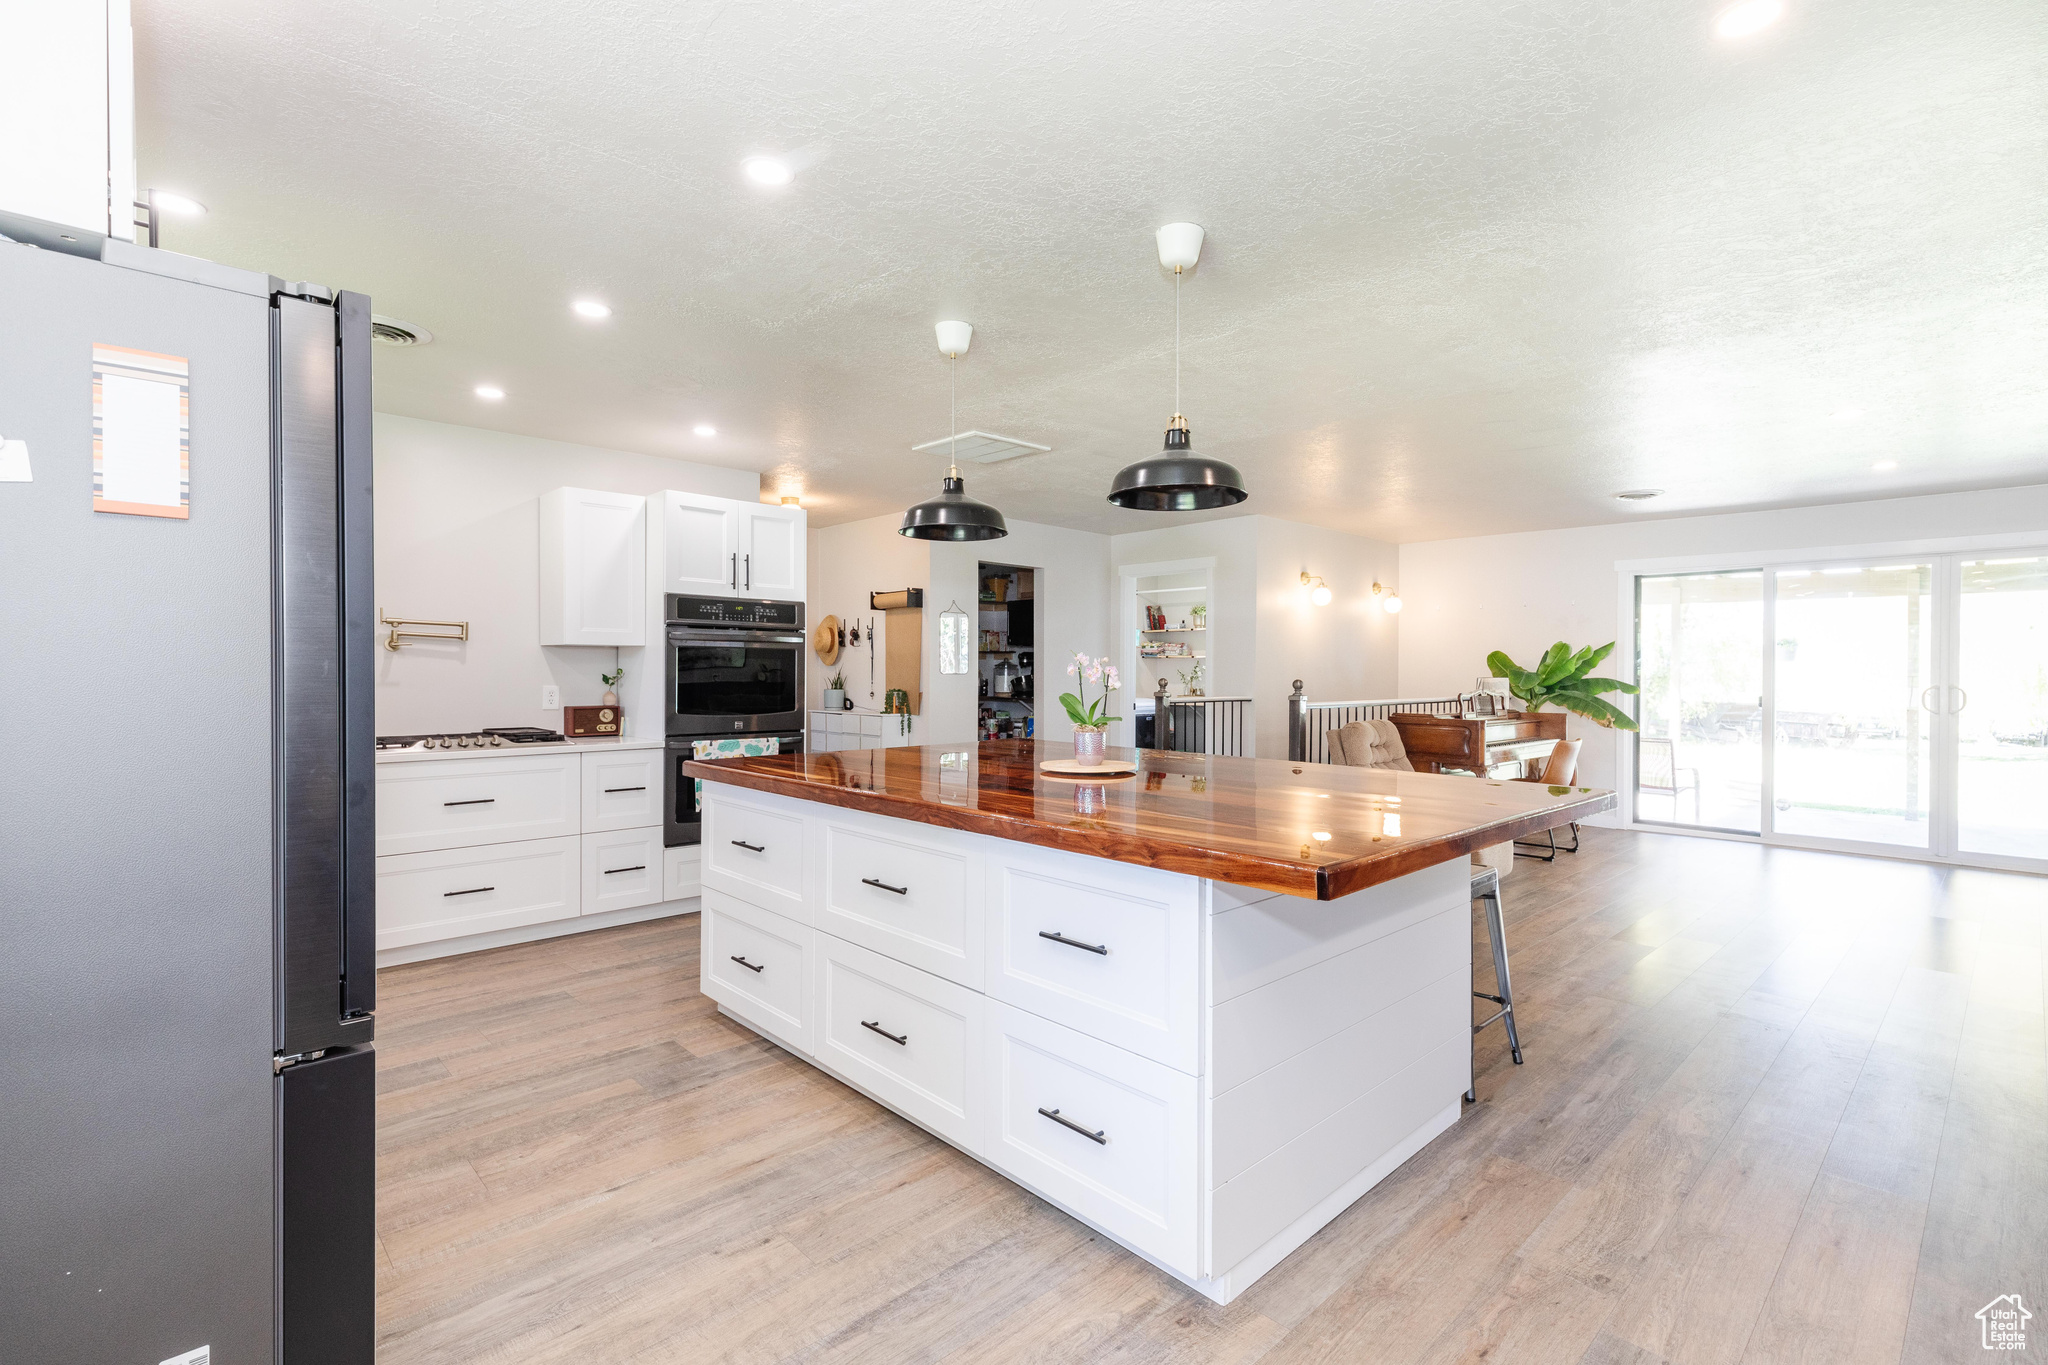 Kitchen with butcher block counters, a kitchen island, stainless steel appliances, white cabinets, and light wood-type flooring